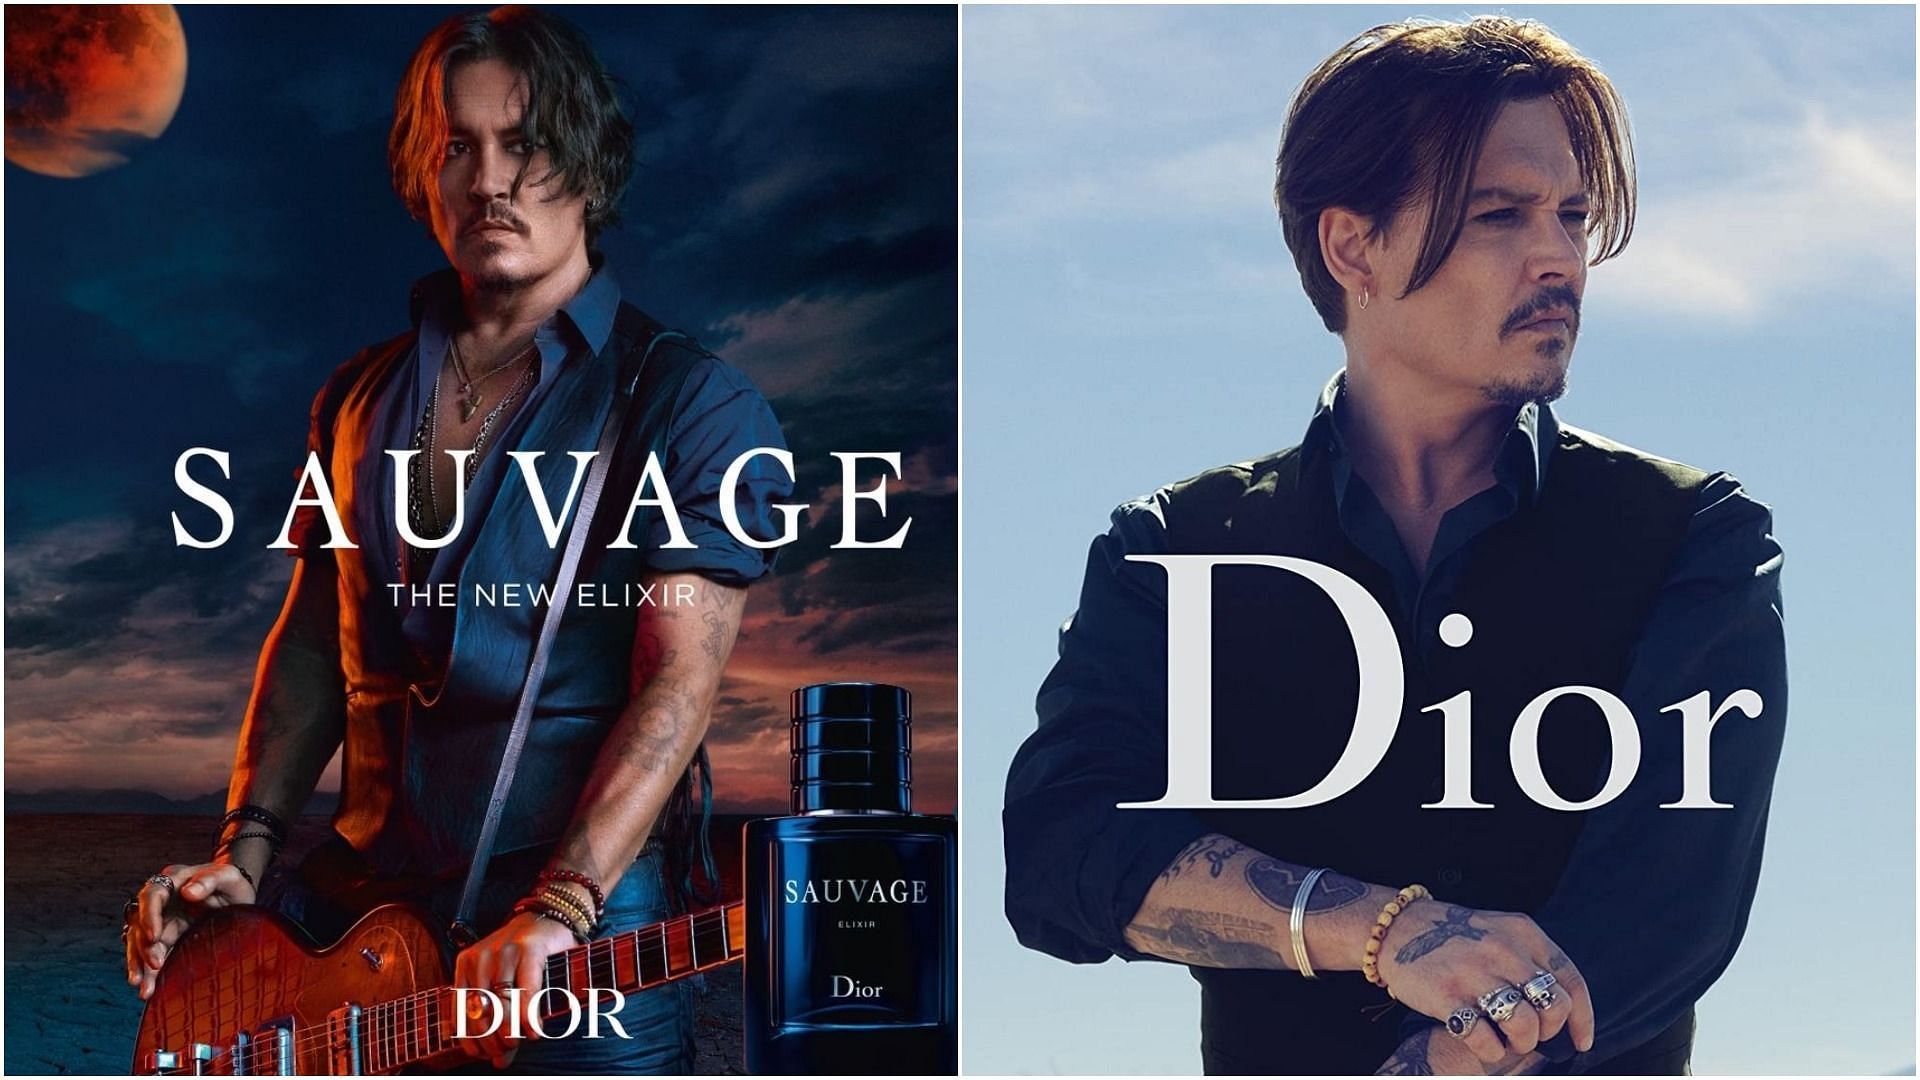 Johnny Depps Dior Sauvage advert pulled over racial insensitivity